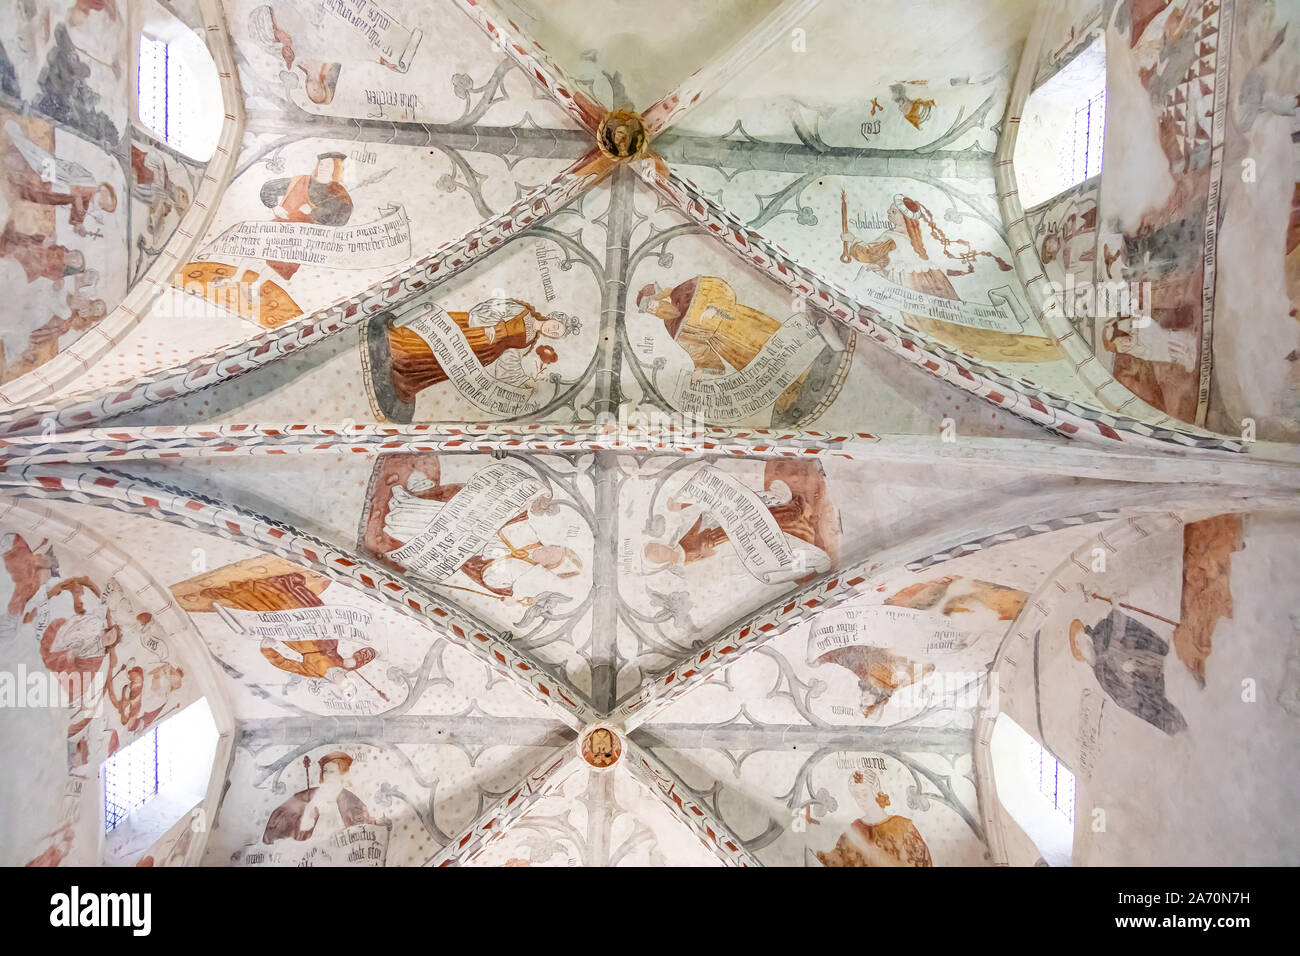 June 29, 2019 Painting of the ceiling of the Bishops' Palace, Saint Lizier, Ariège department, Pyrenees, Occitanie, France Stock Photo